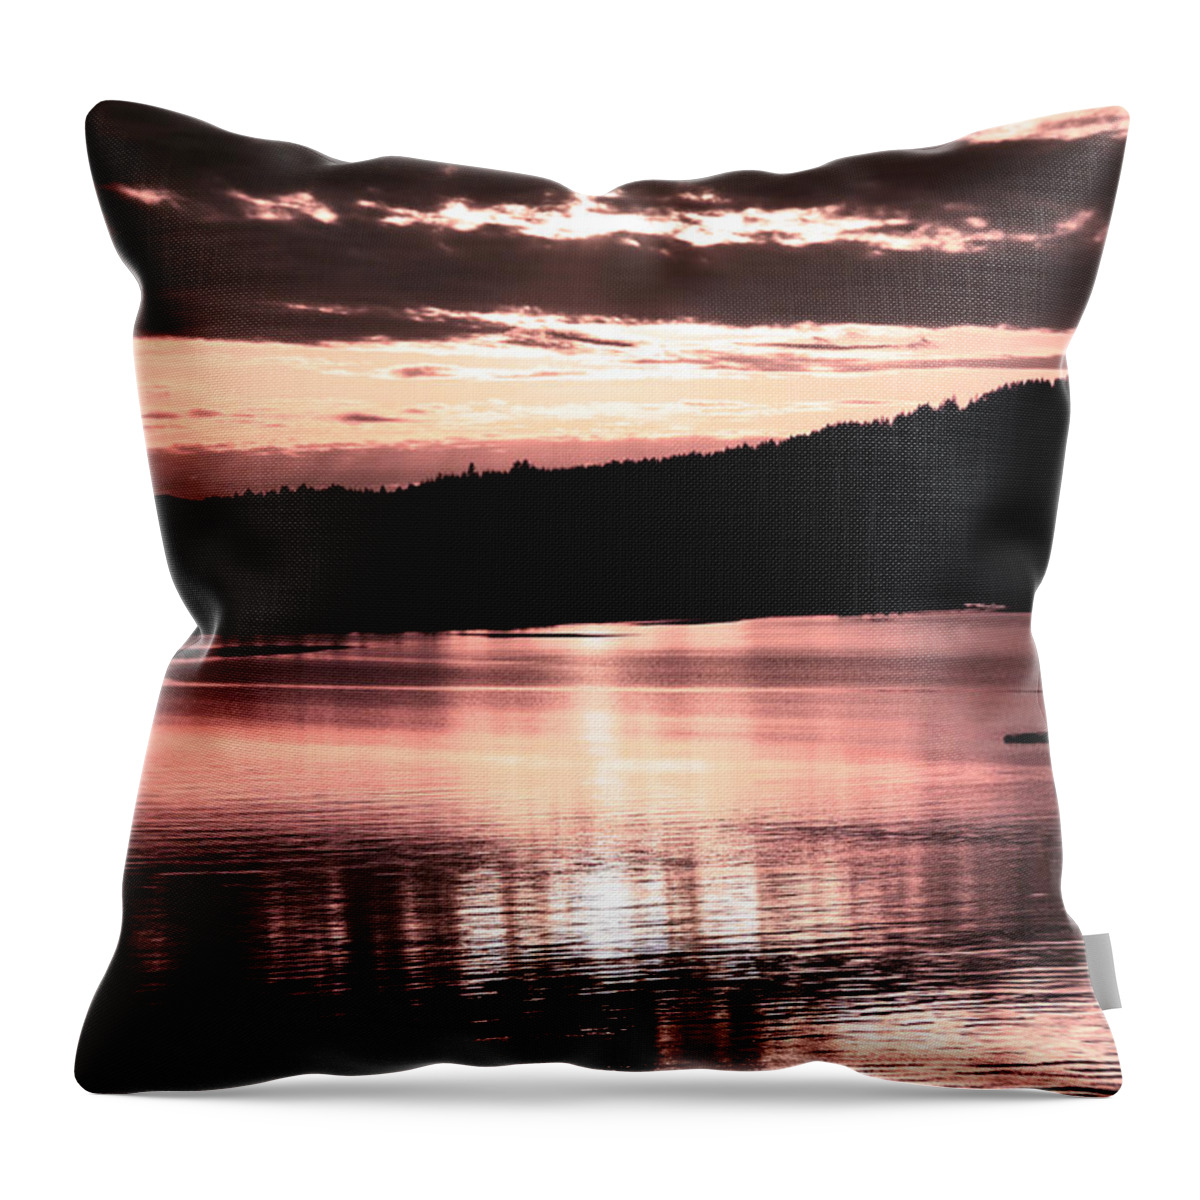 Sunset Photography Throw Pillow featuring the photograph Rosy Sunset by Bonnie Bruno